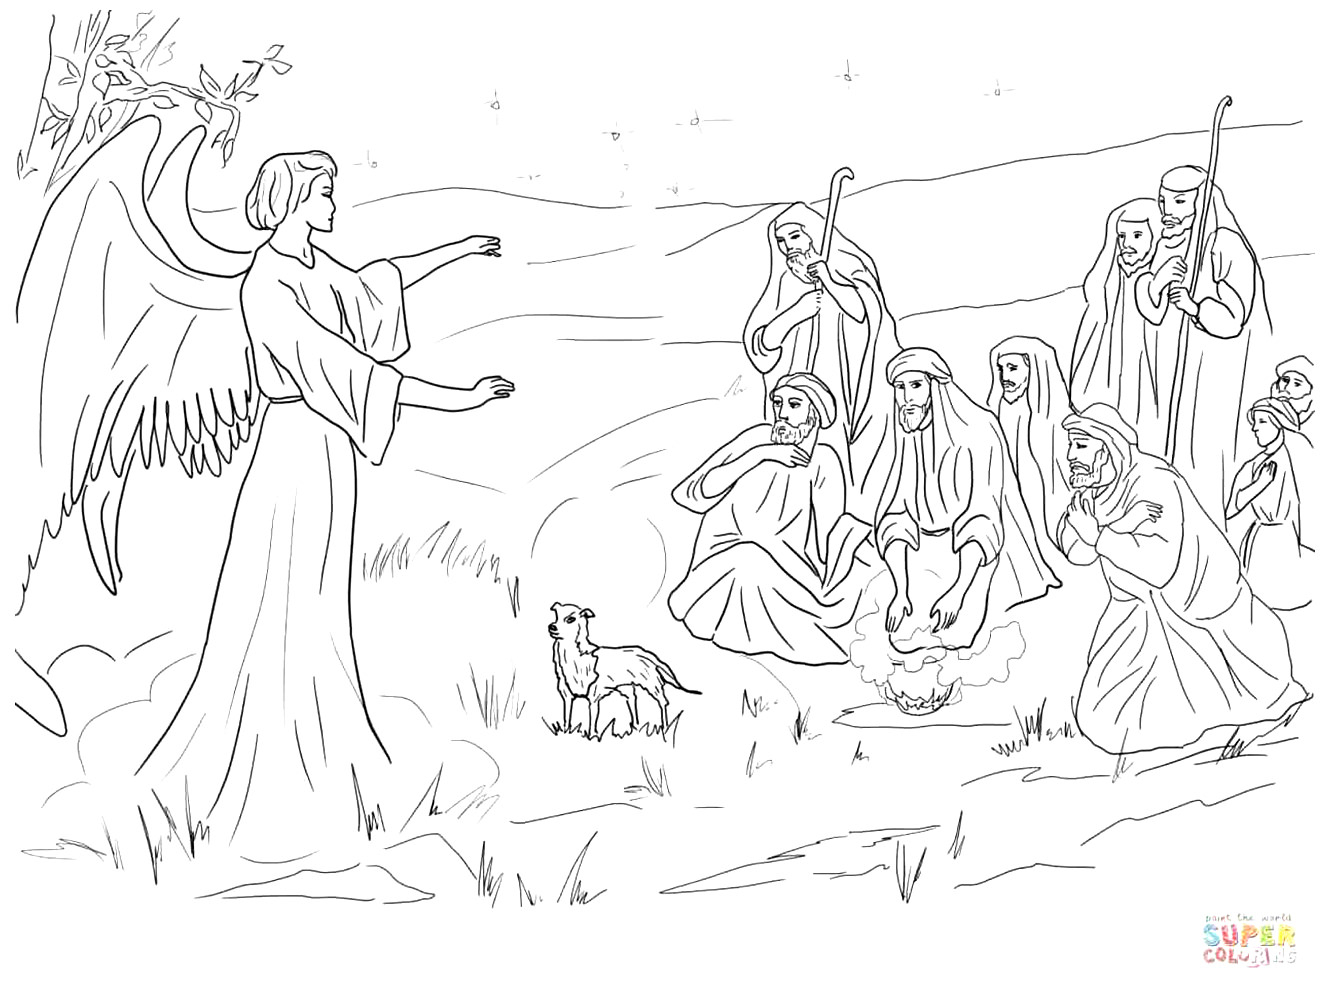 Angel Visits Joseph Coloring Page Free Christian Coloring Pages For Children And Adults Level 3